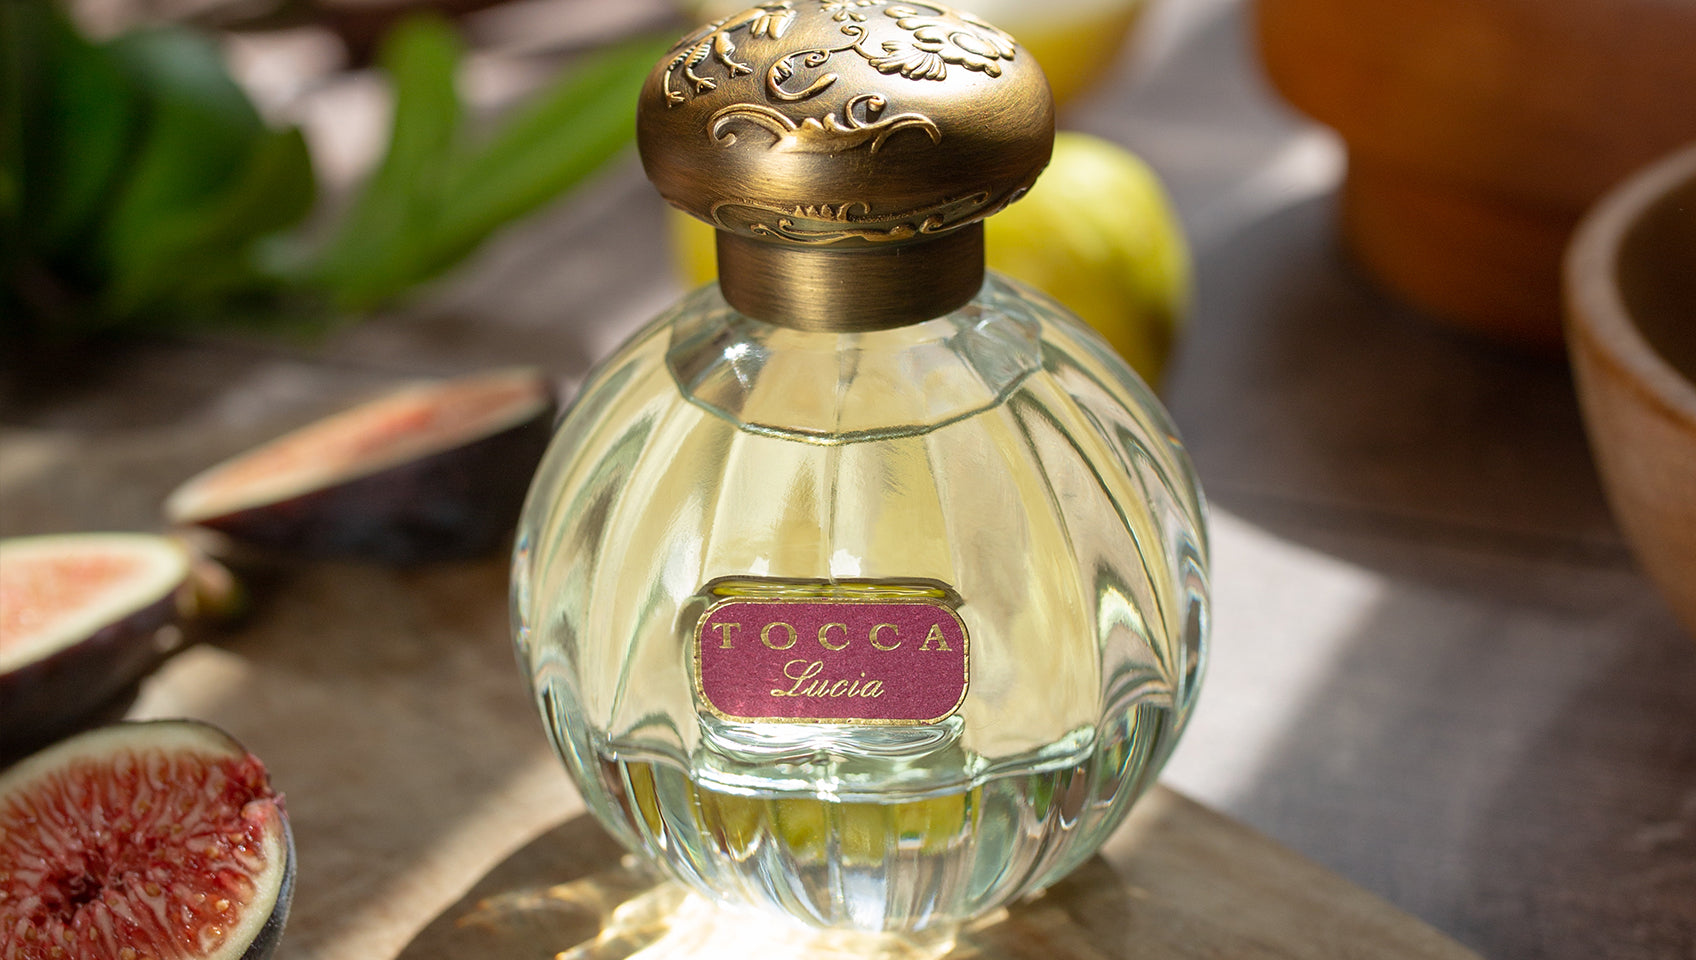 TOCCA Beauty and Home Fragrances